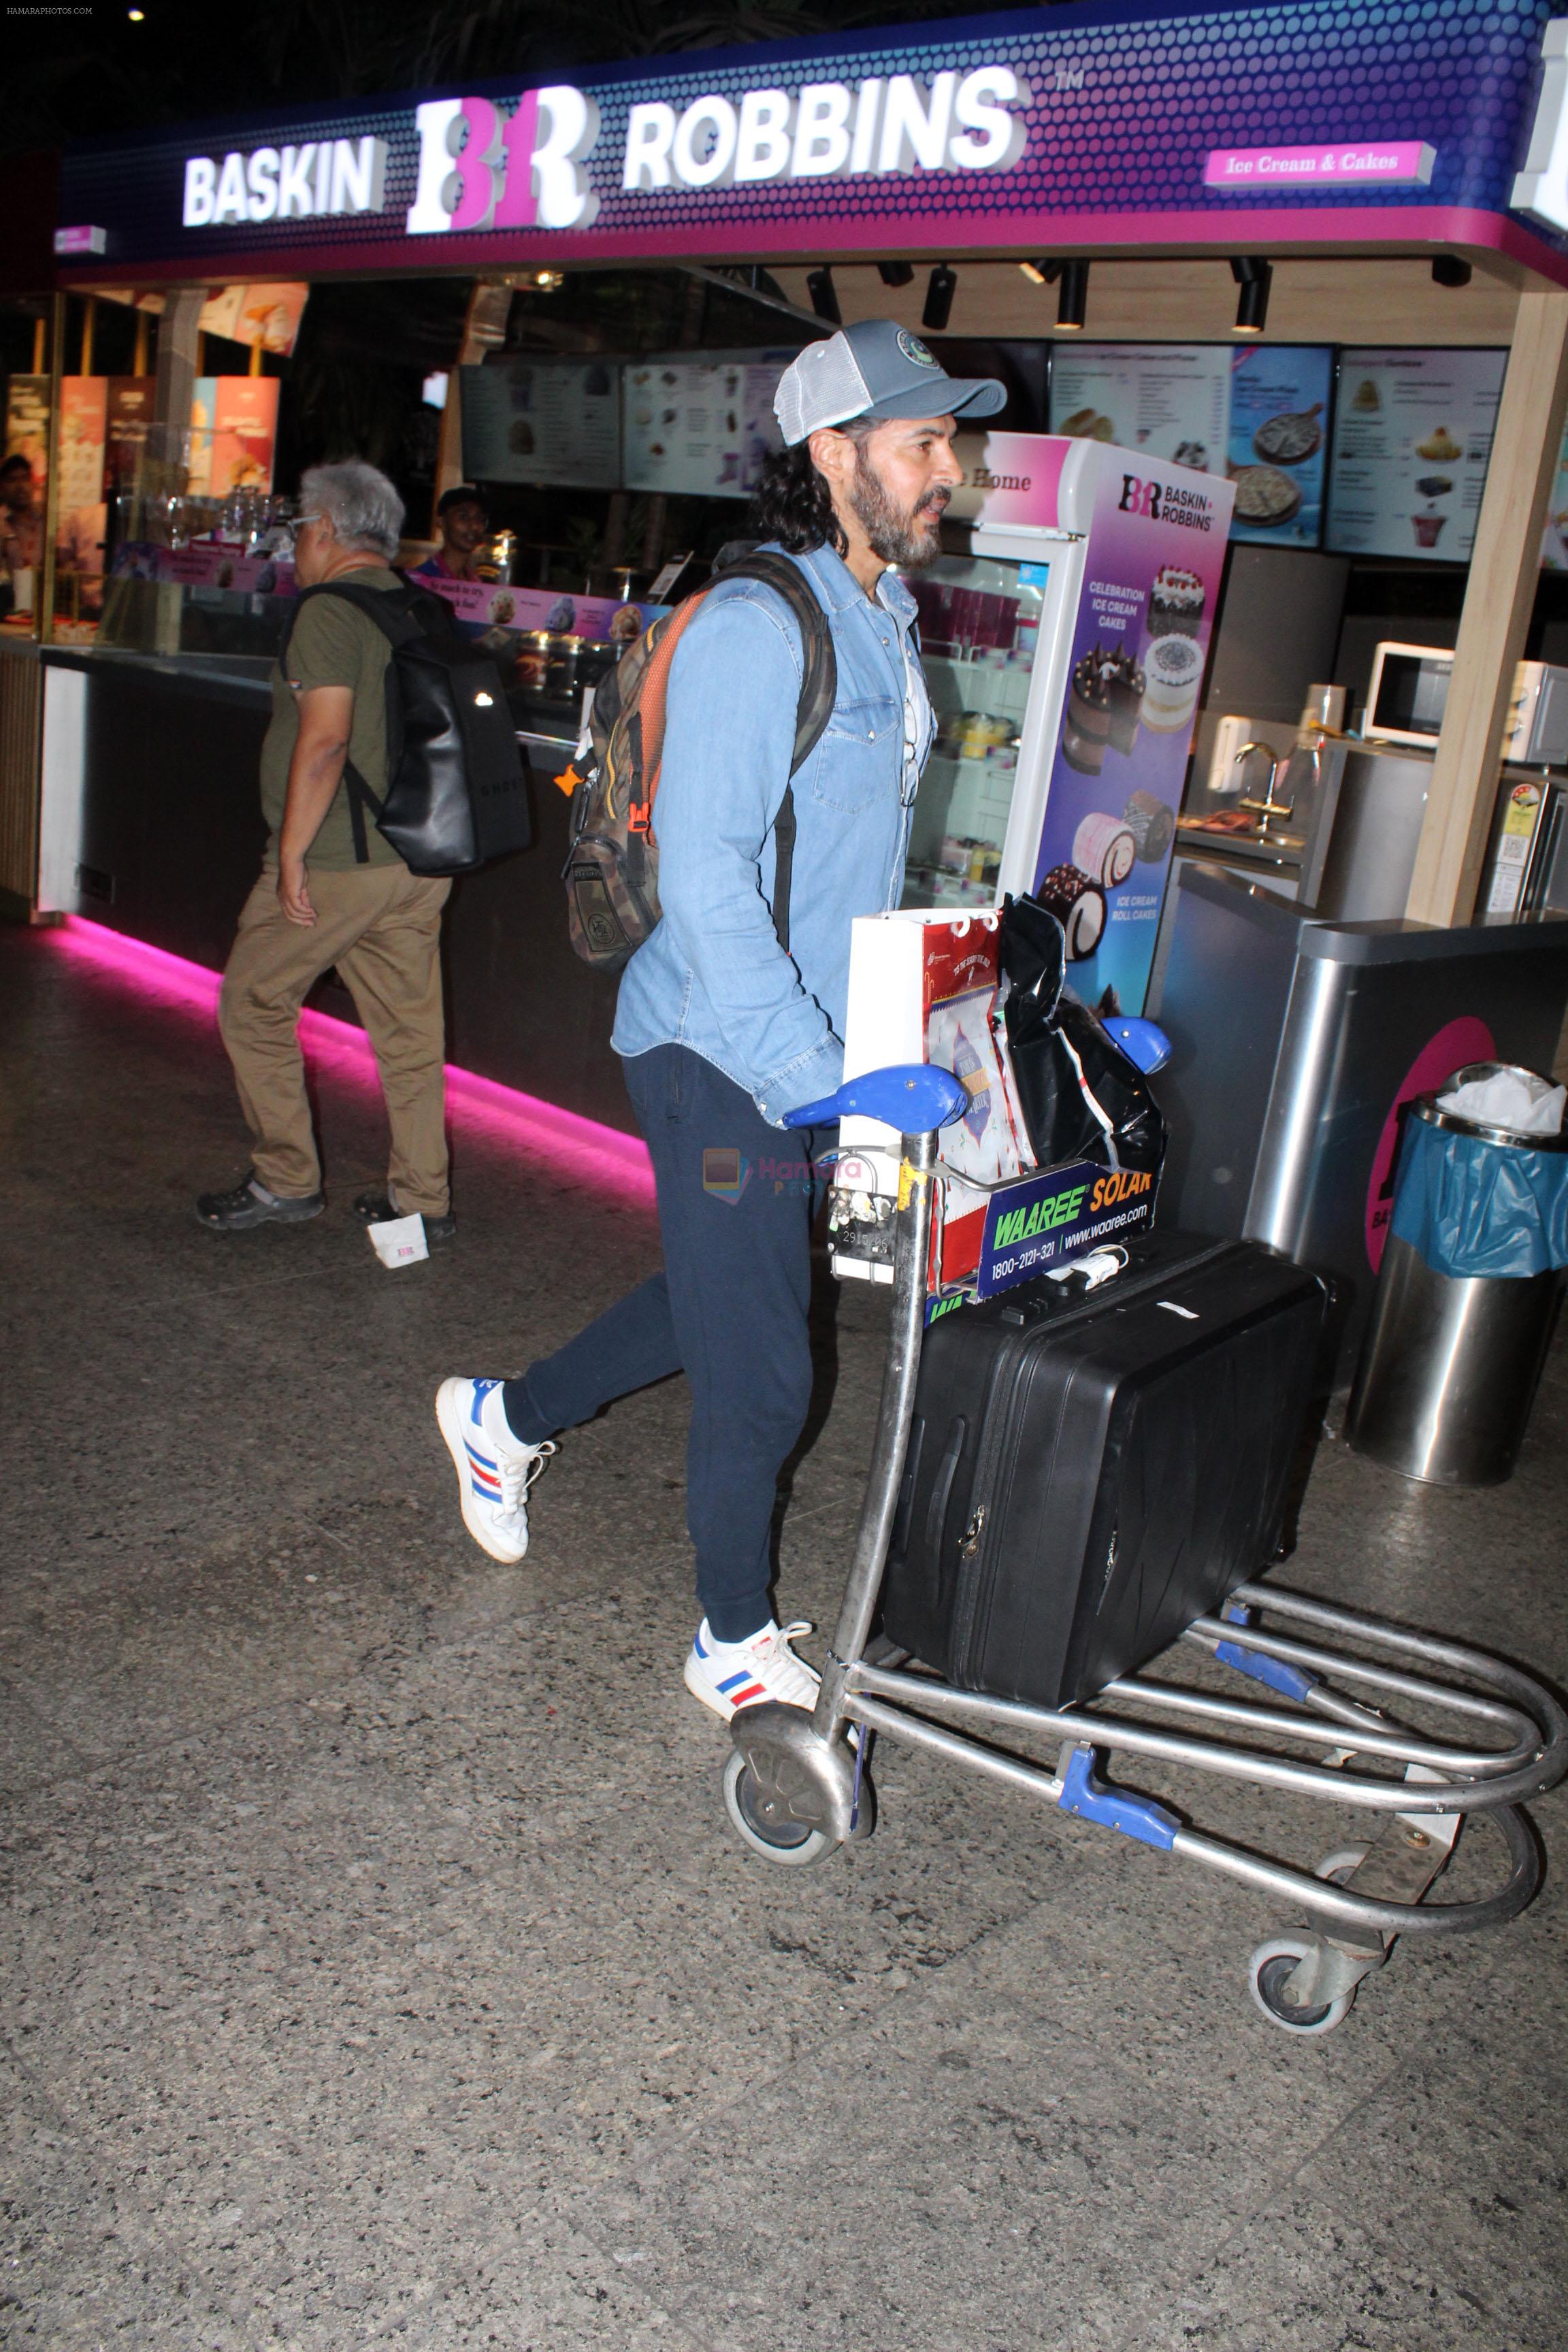 Dino Morea dressed in a jeans shirt and sweat pant with gray hat spotted at airport on 13 Jun 2023